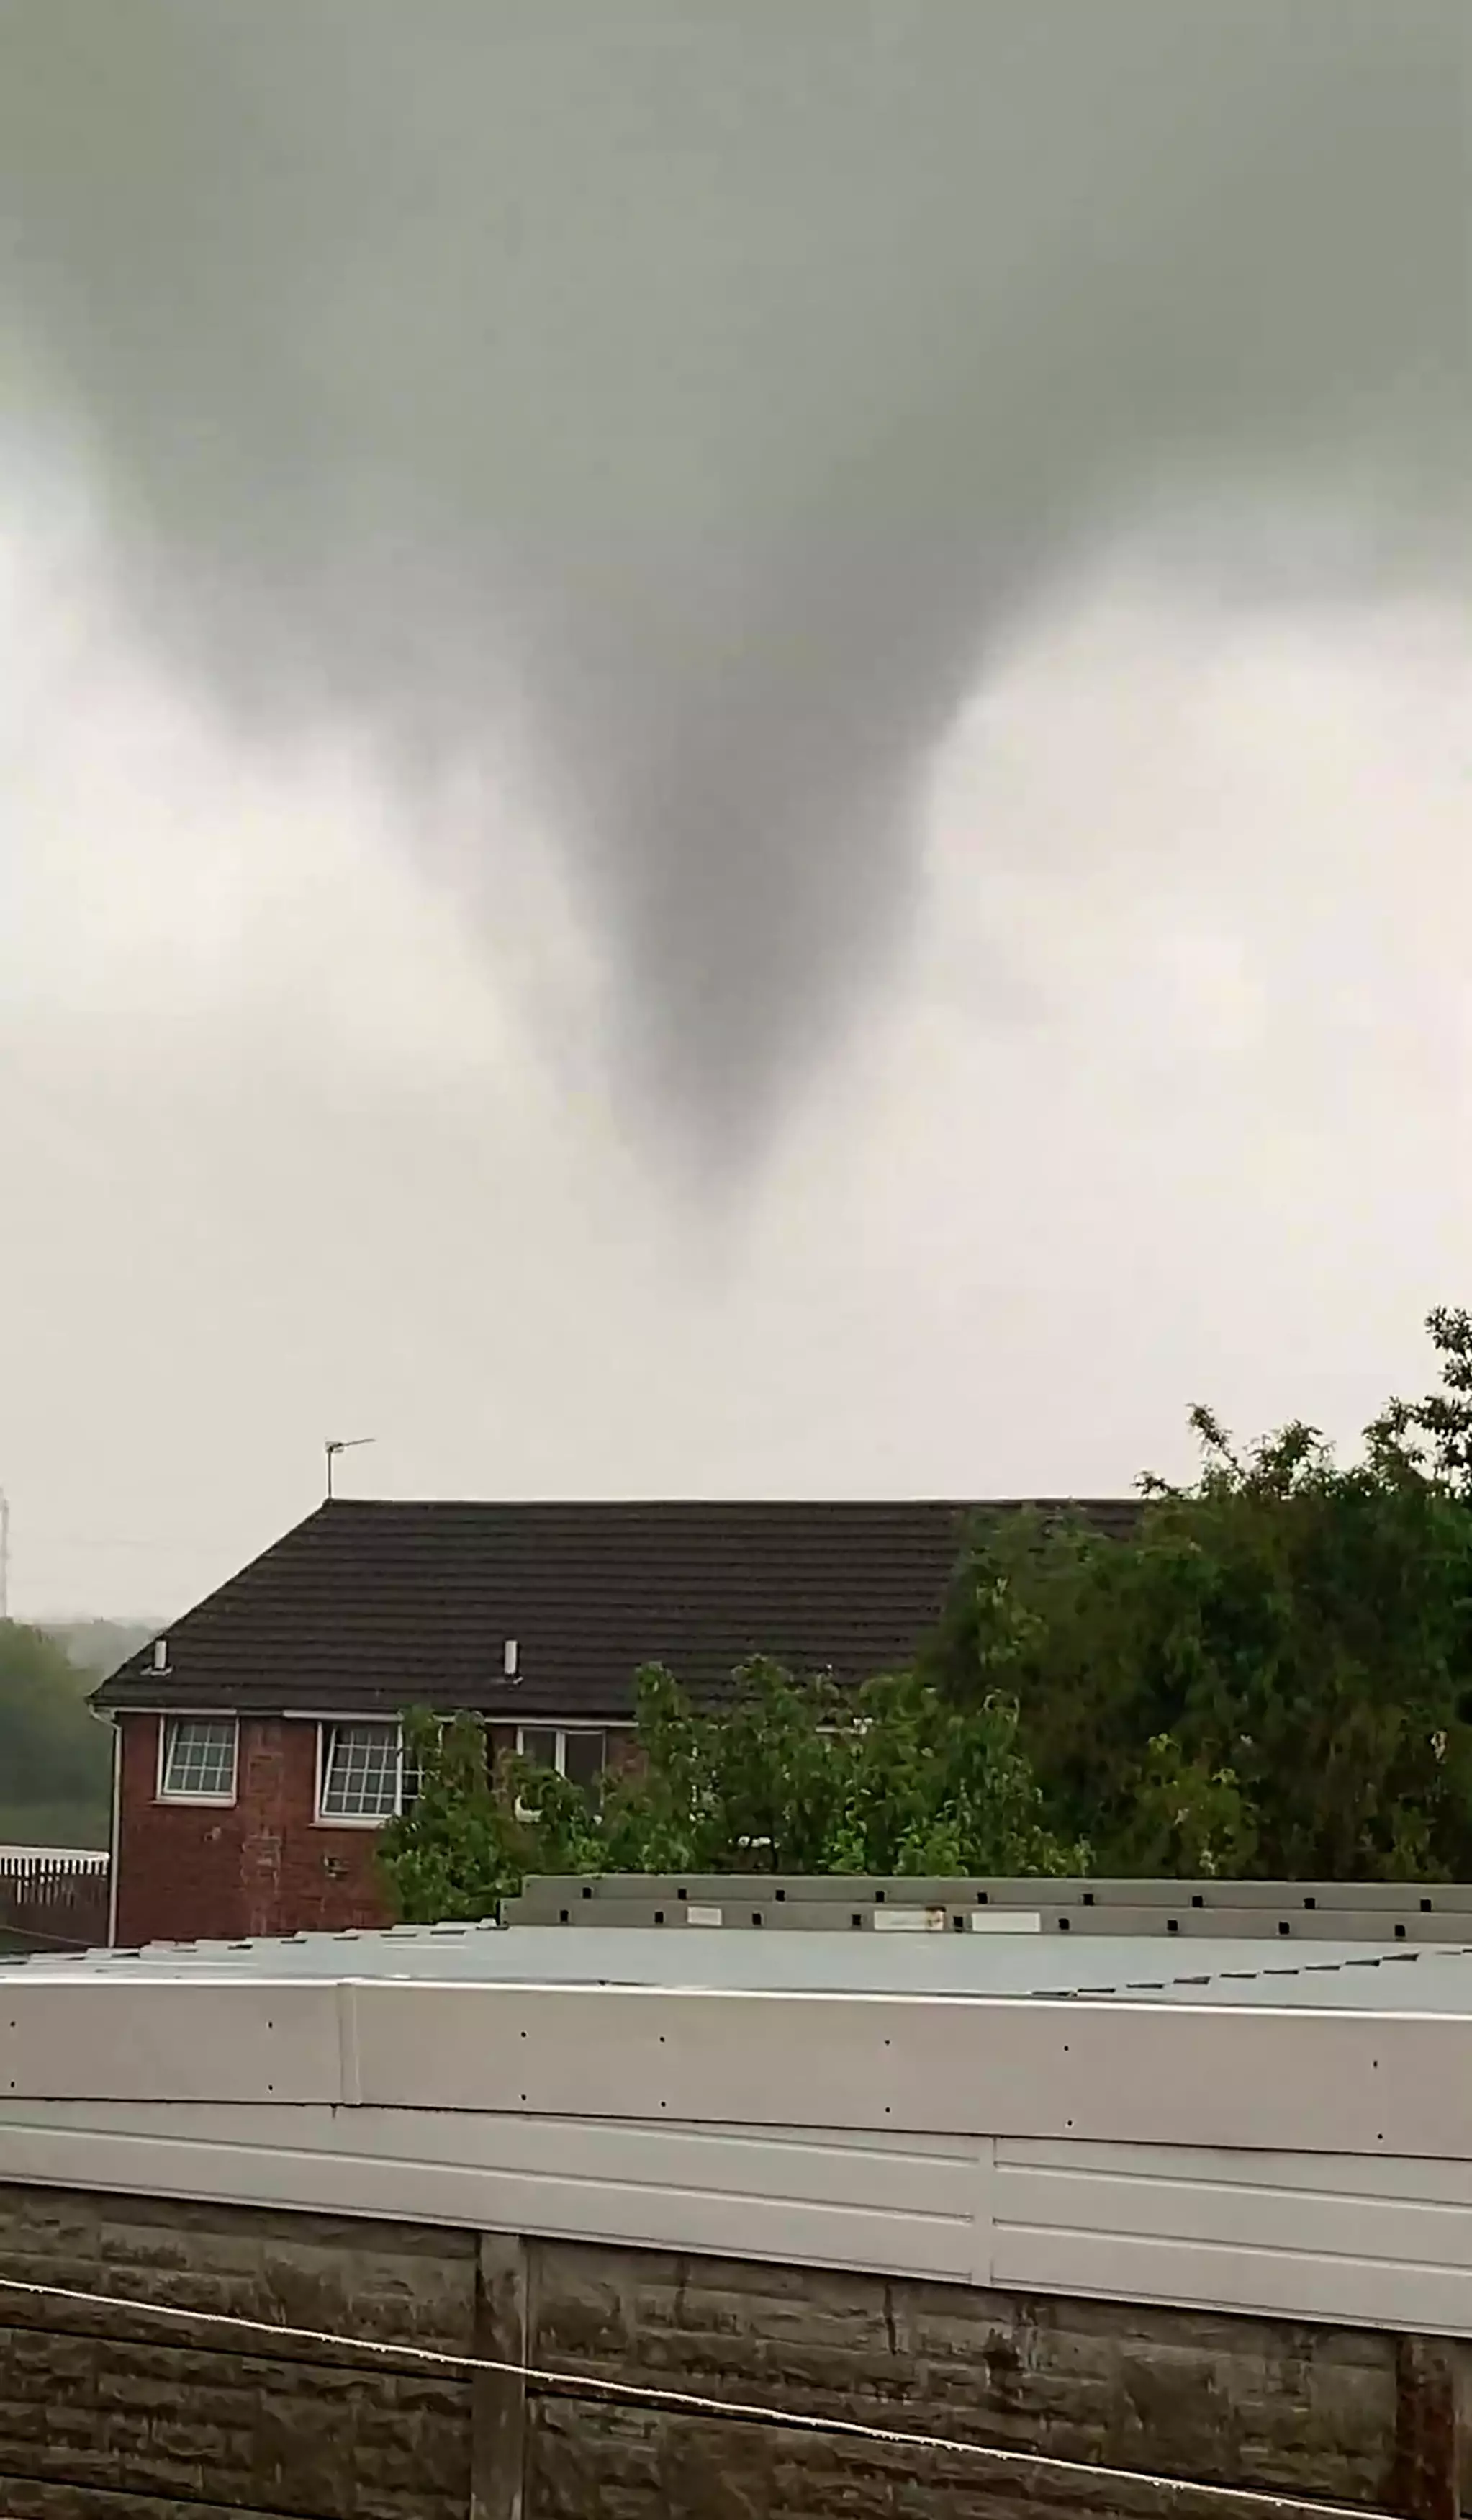 Dean Hargreaves was in the back garden on Saturday when he spotted the tornado.